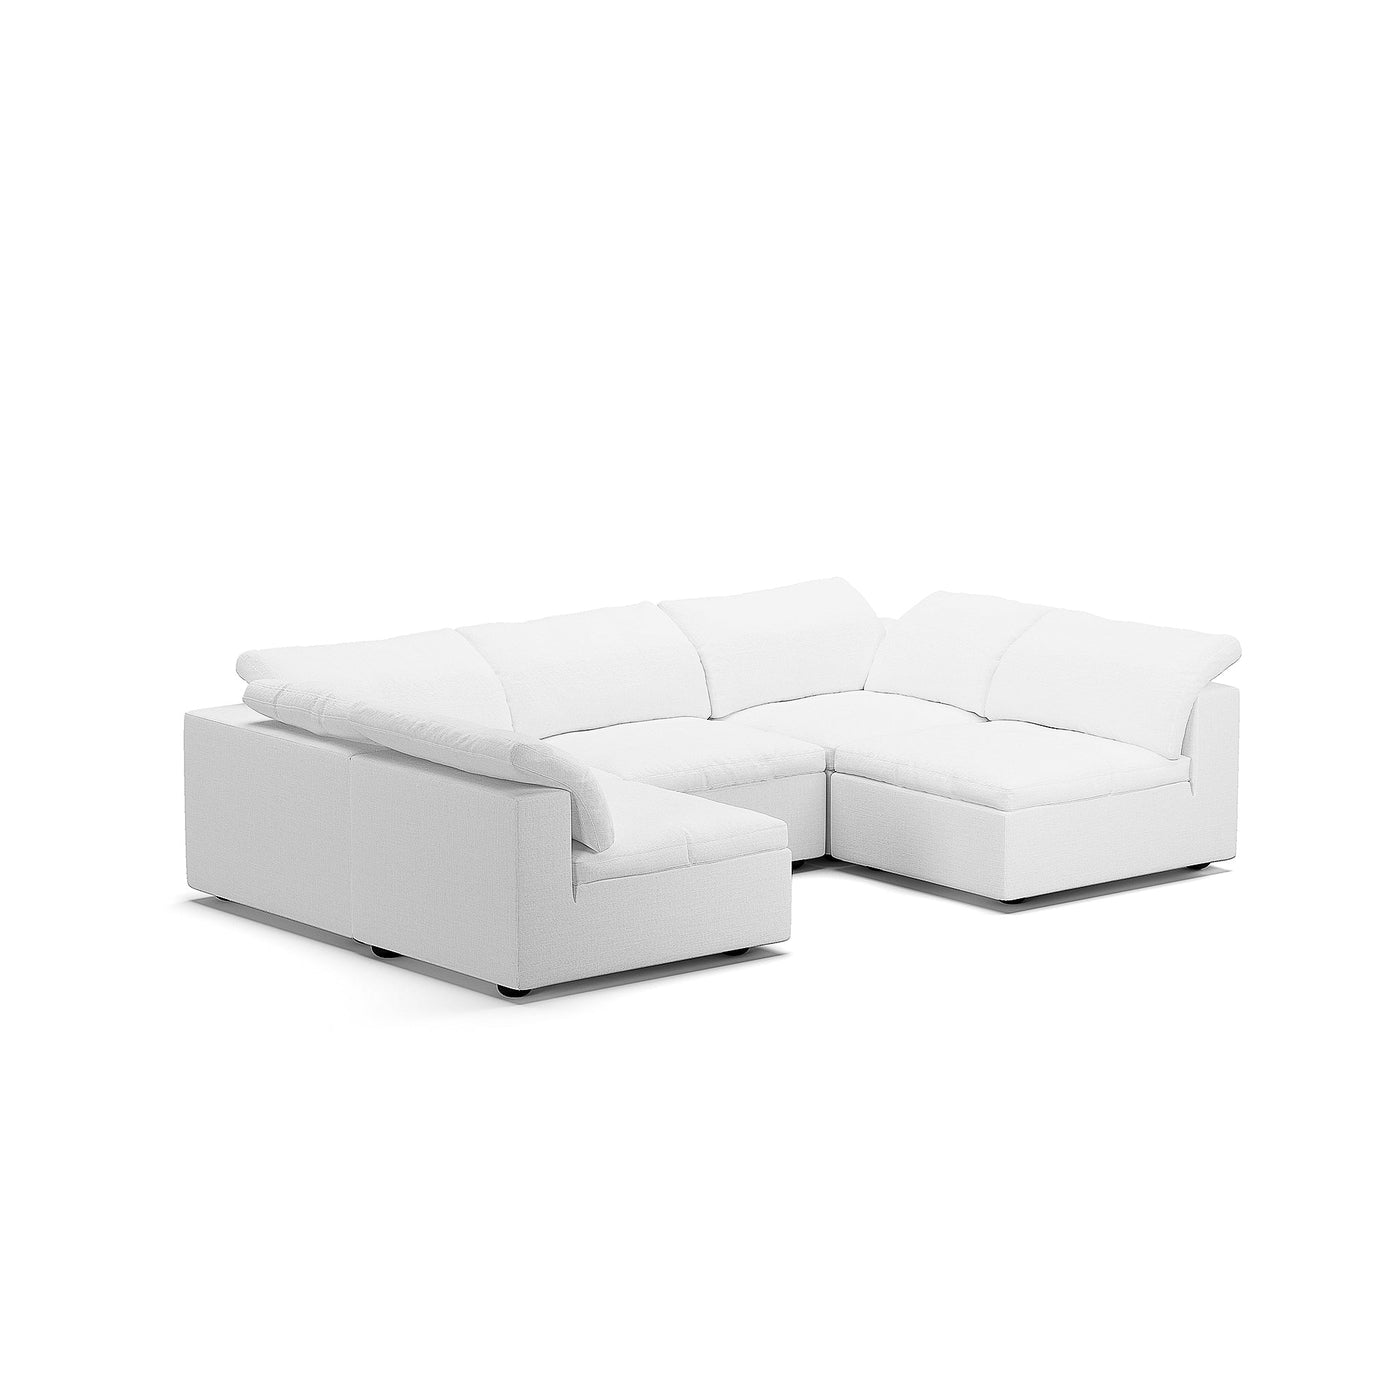 Tender Wabi Sabi Sand U Shaped Sectional with Open Ends-White-128.0"